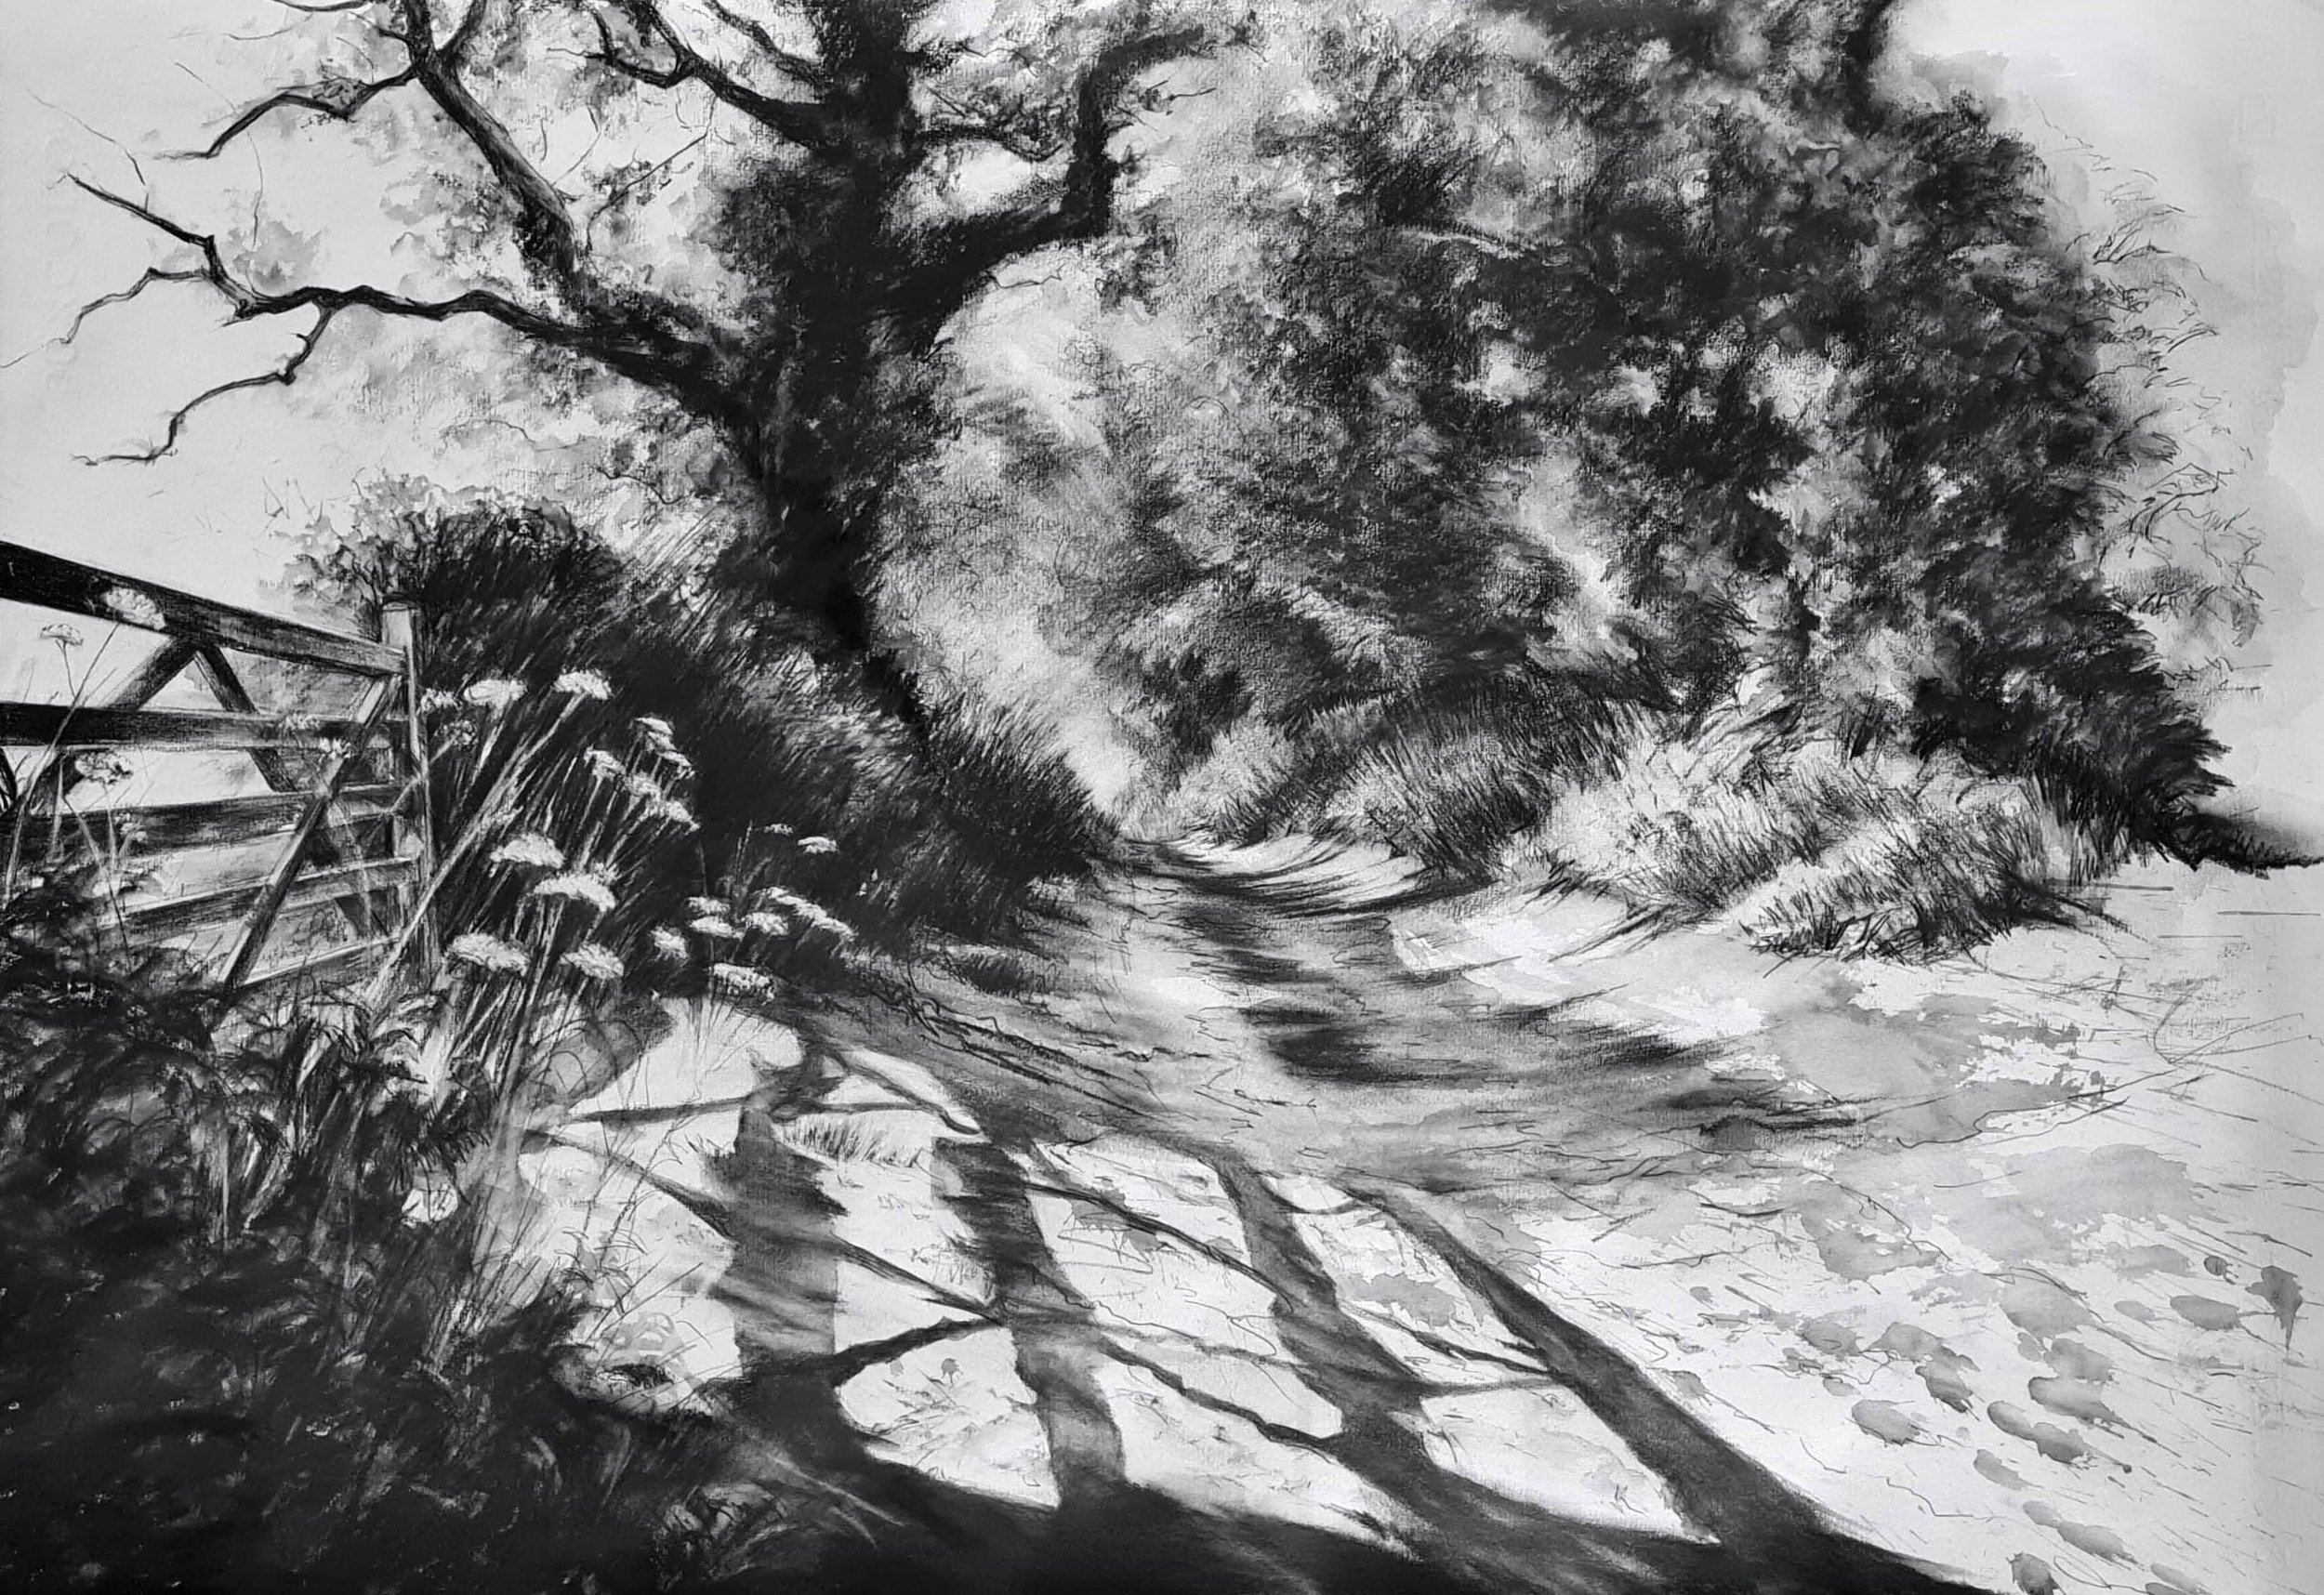 Subtractive Charcoal Drawing Workshop - WENDY LEACH ARTIST